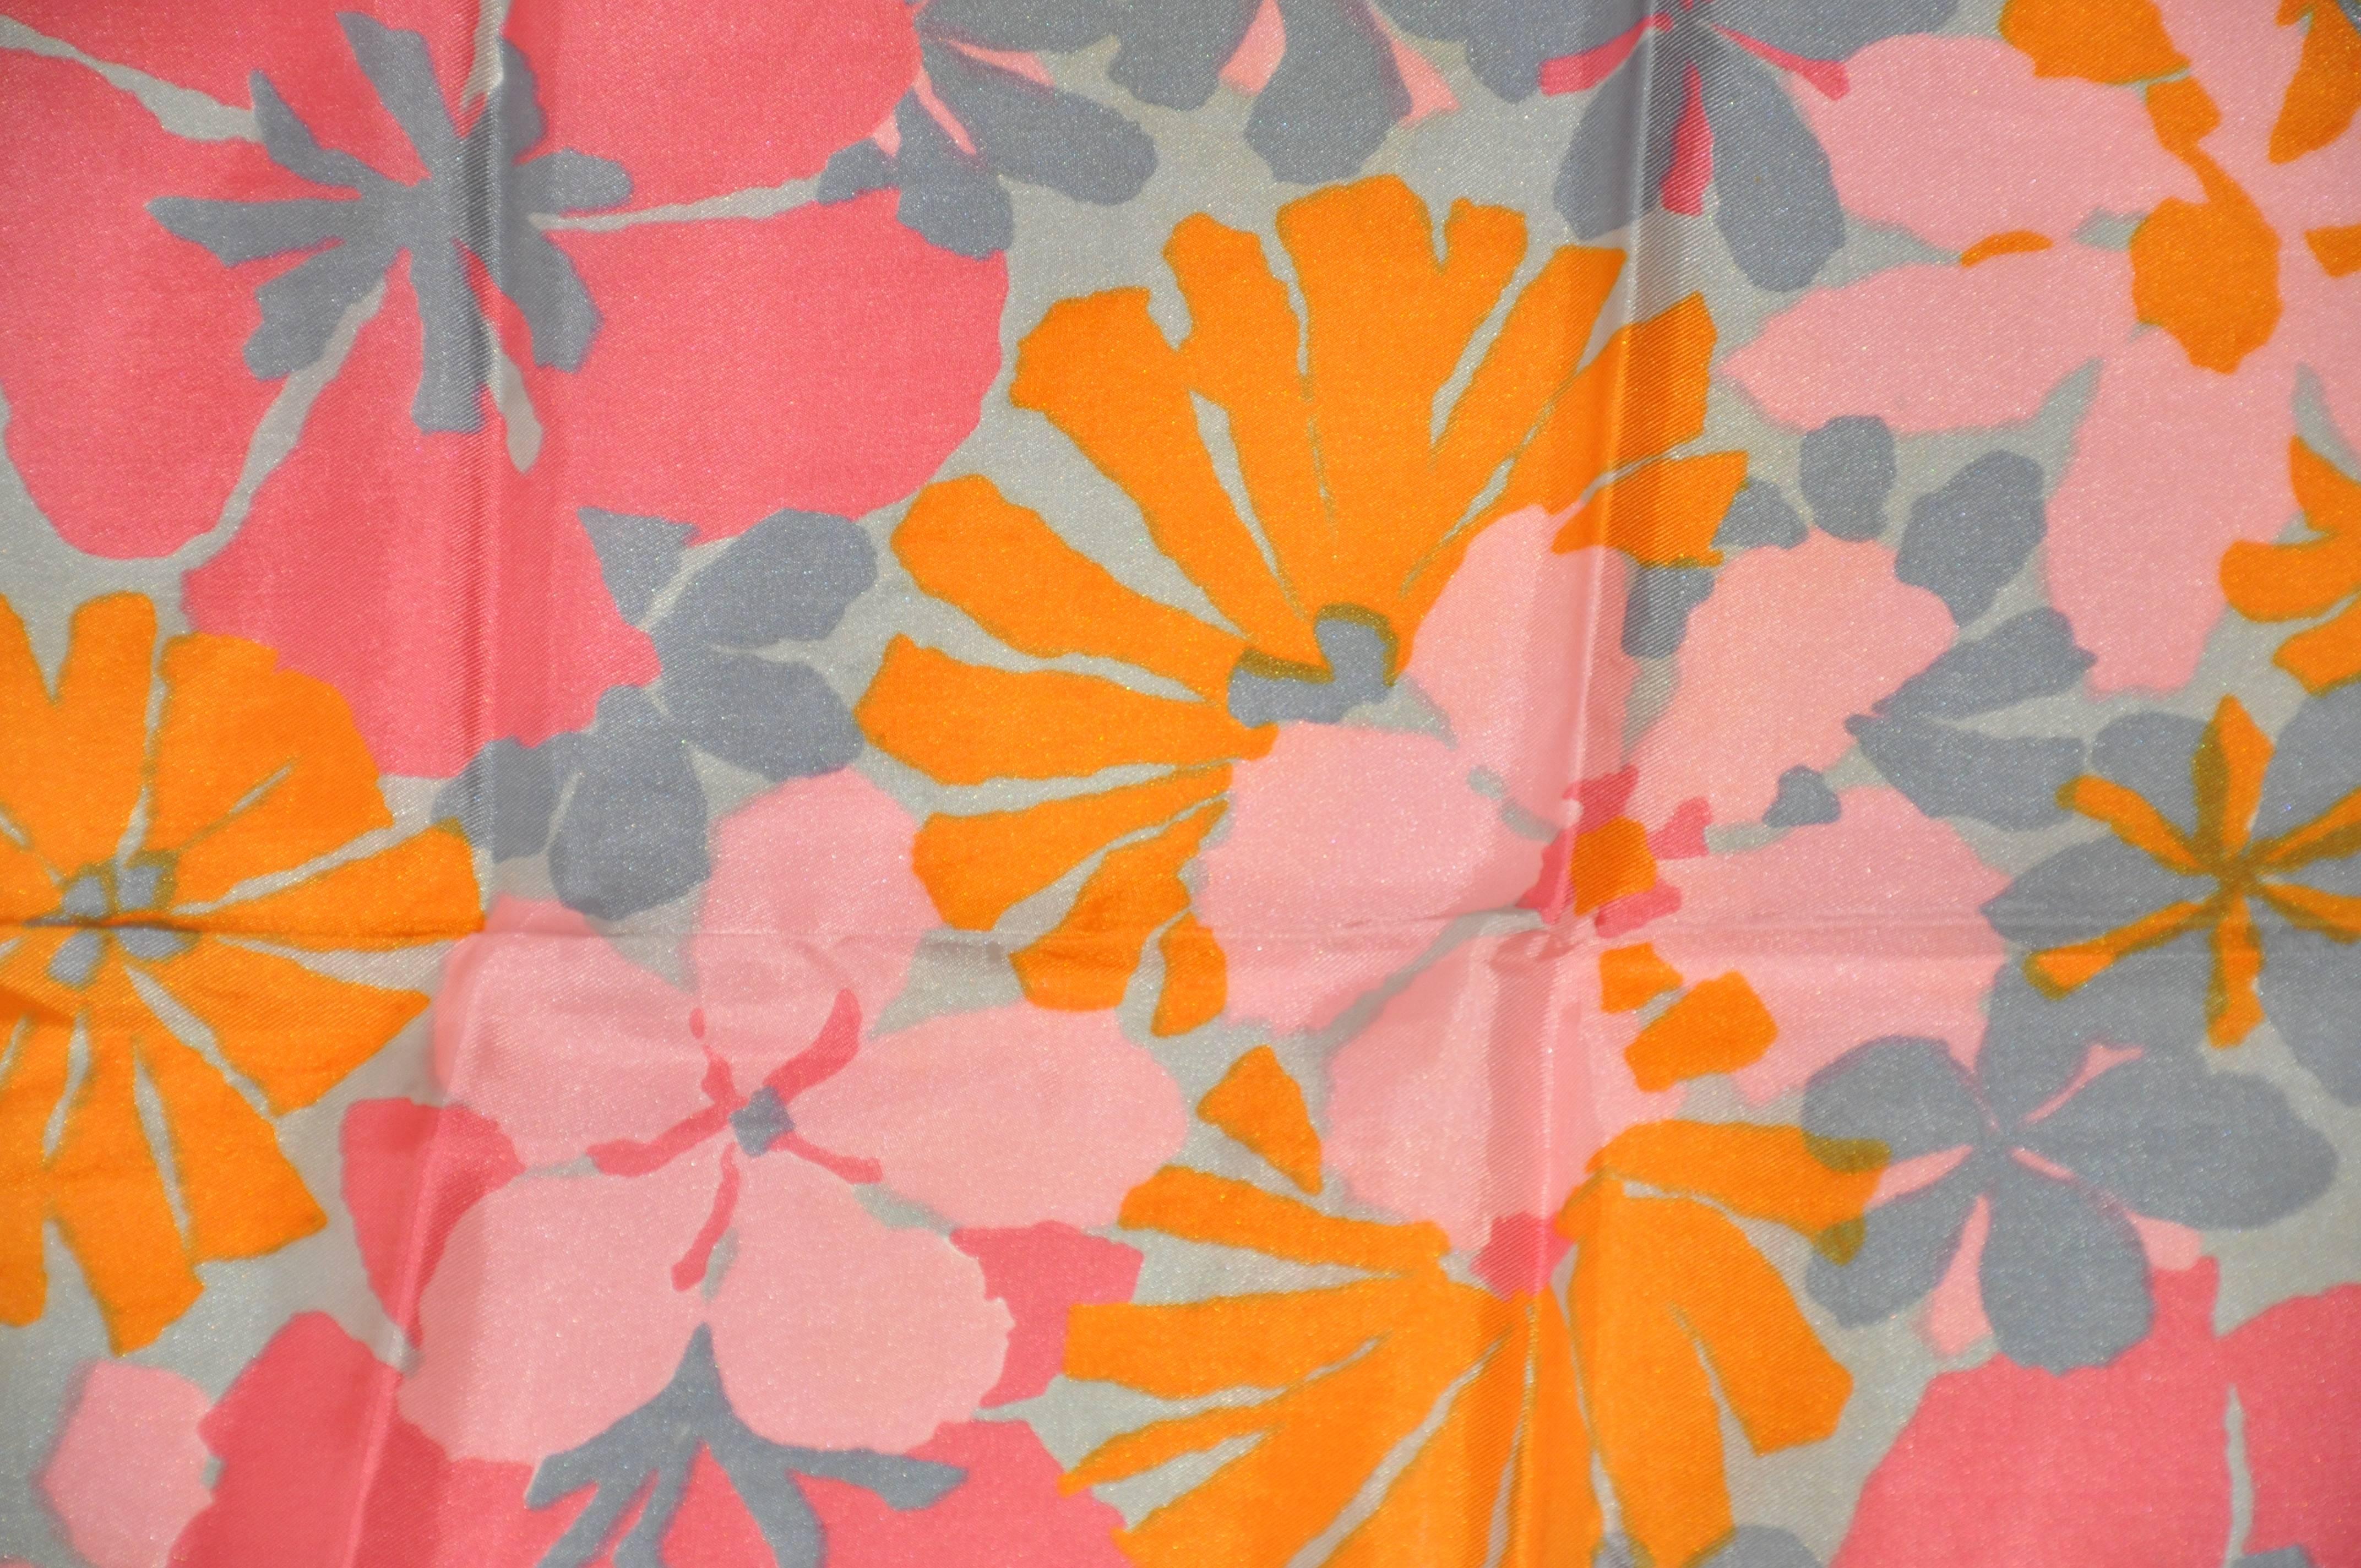 Vera bold multi gray, rose, pinks and tangerine "floral" scarf measures 15" x 44". Made of rayon and silk from Japan.